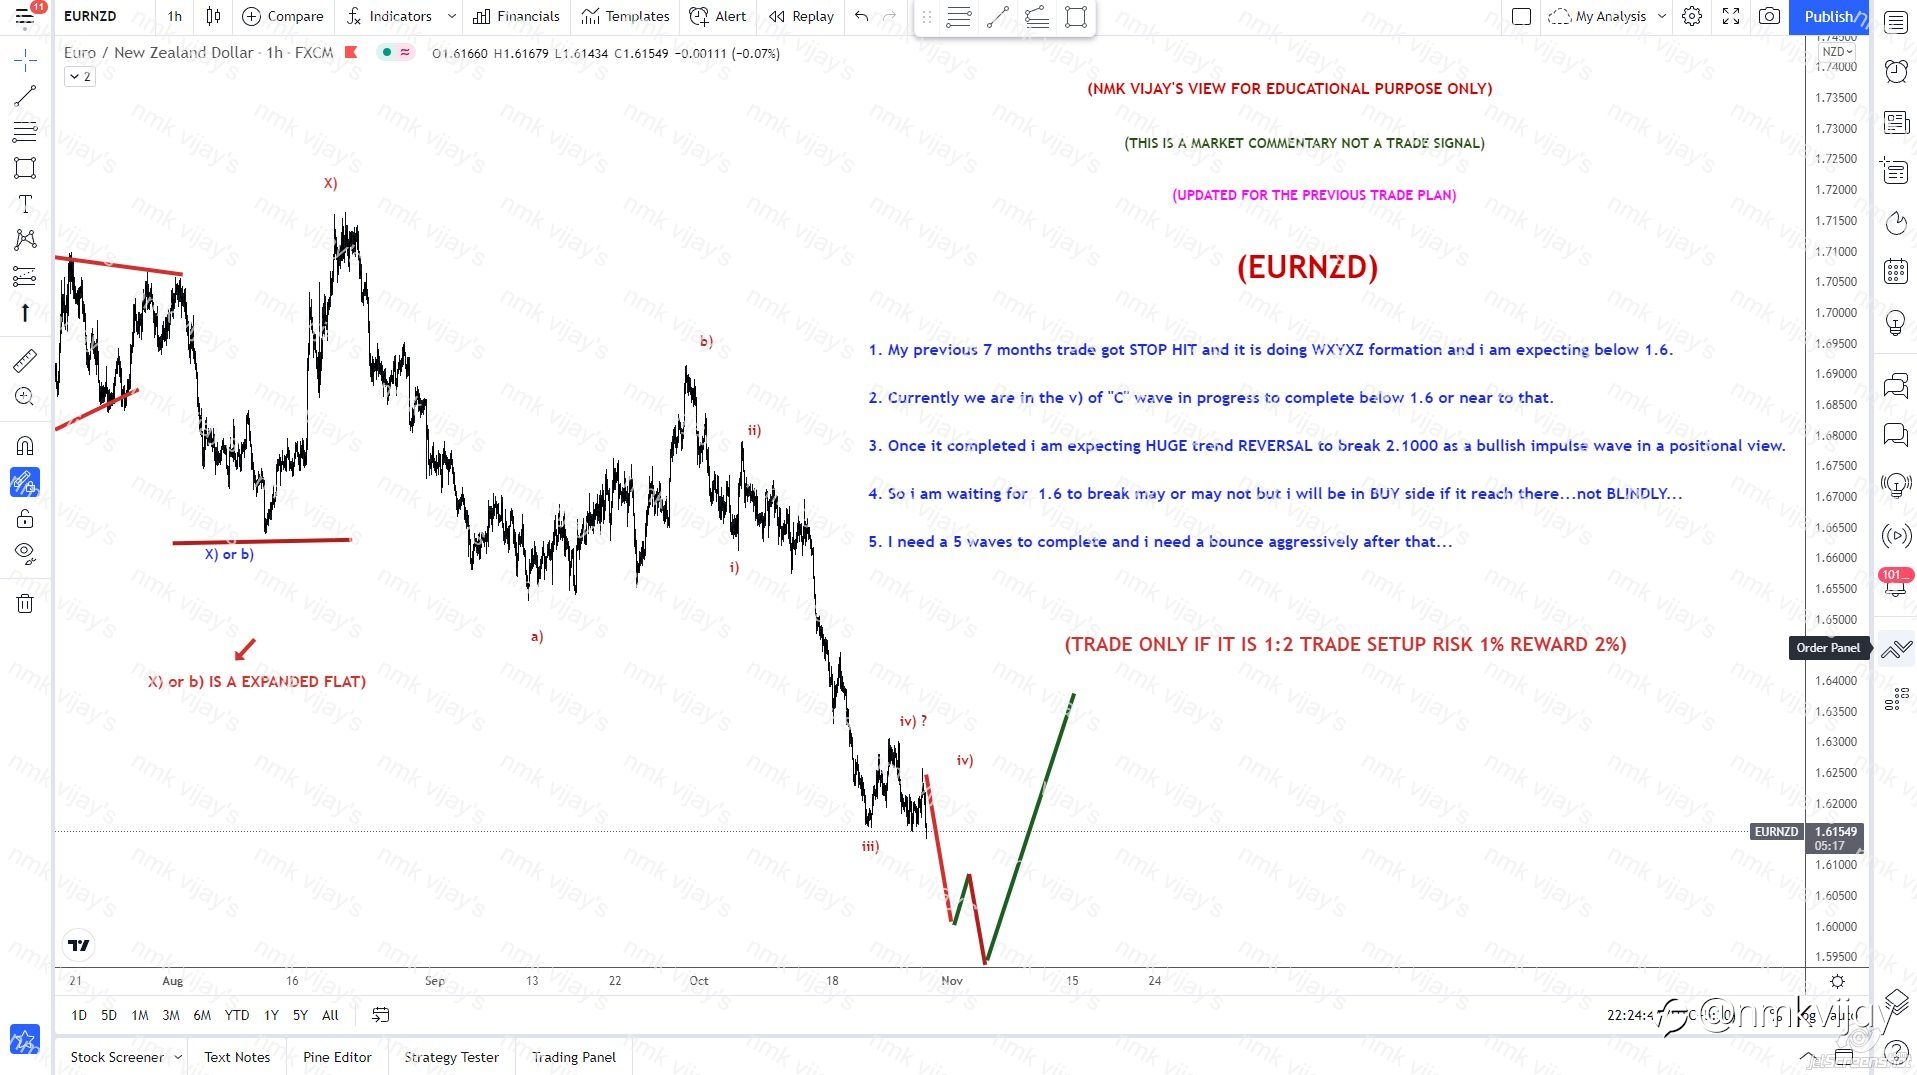 EURNZD-Expecting below 1.6 to complete Z)